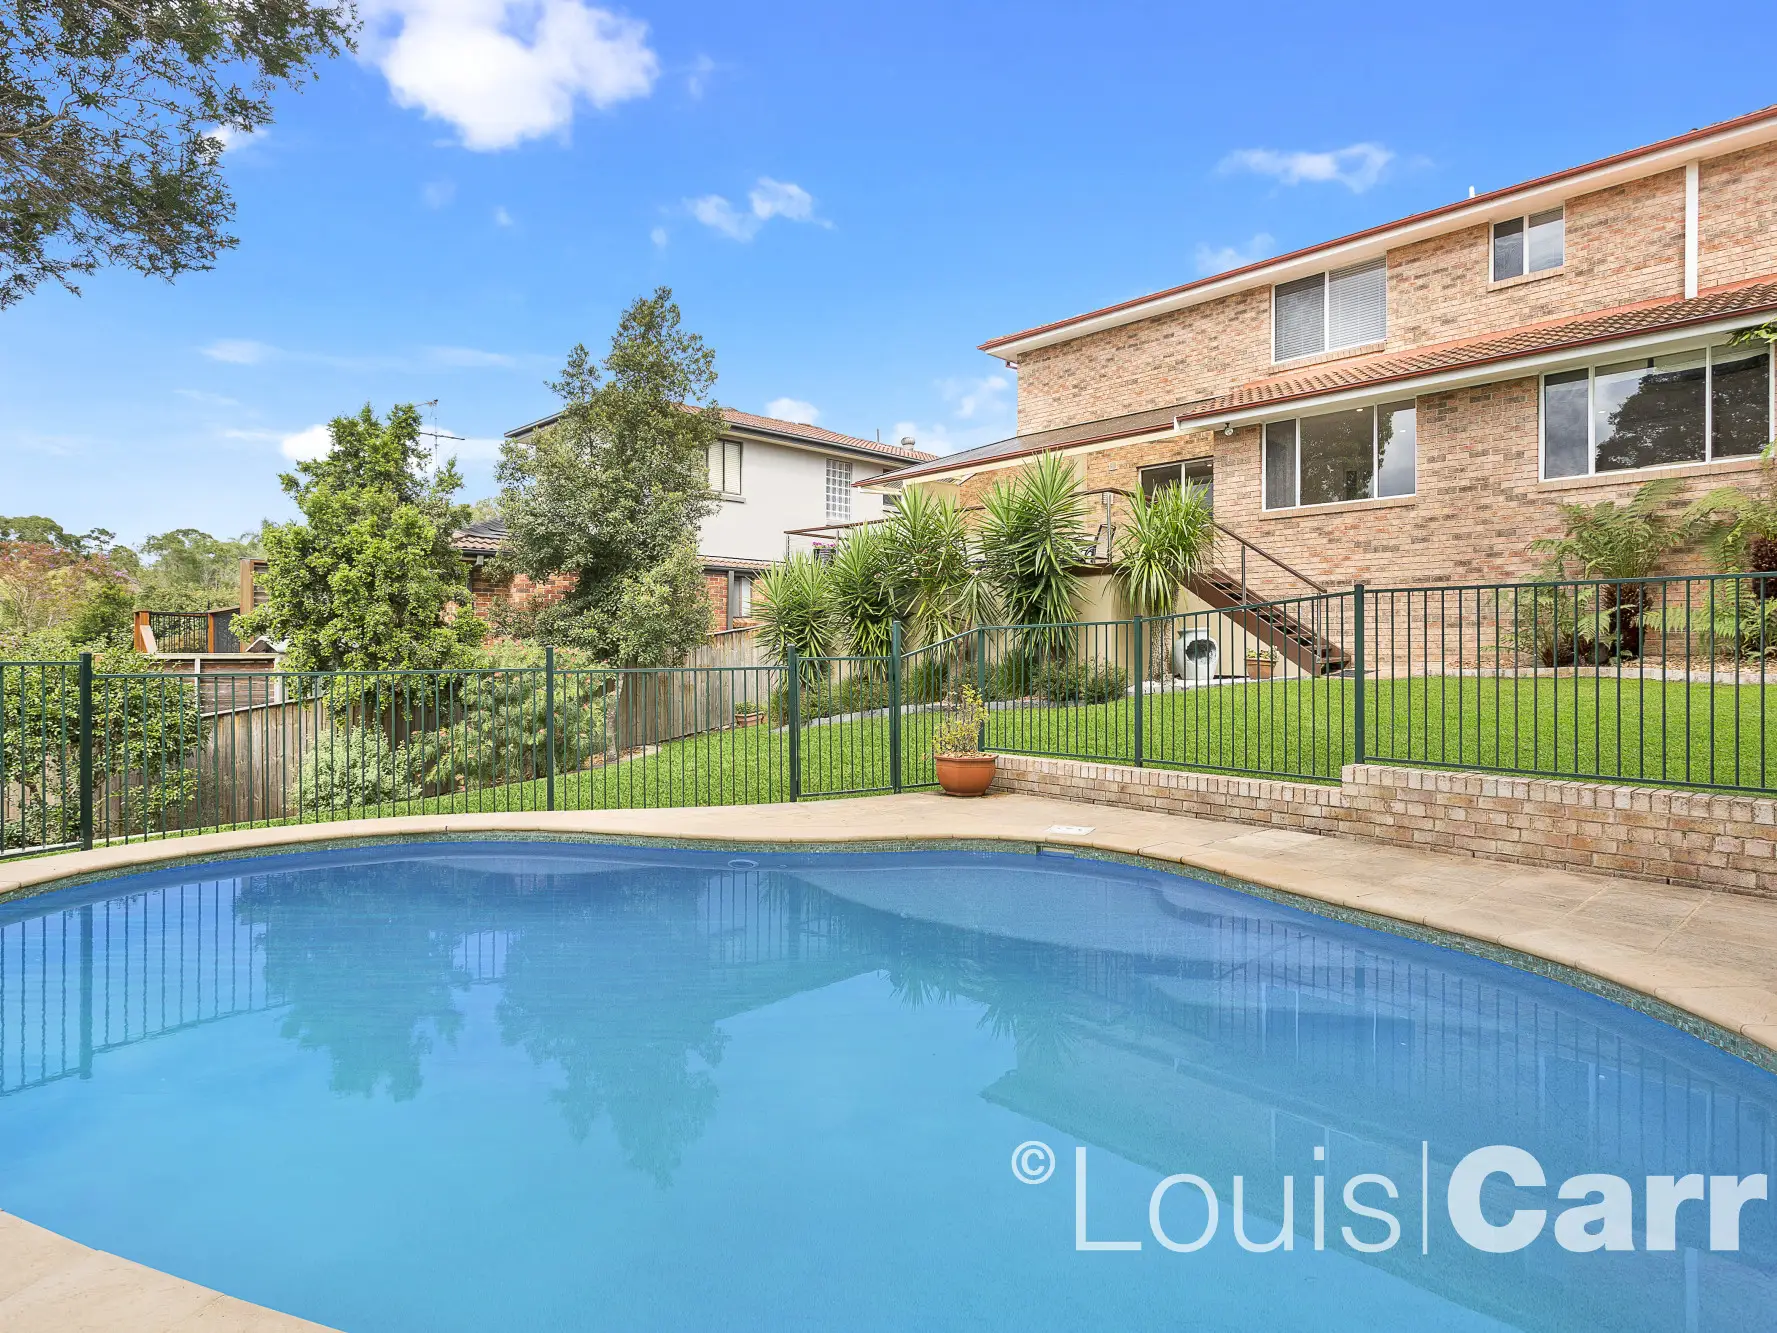 Photo #5: 6 Pineview Place, Dural - Sold by Louis Carr Real Estate